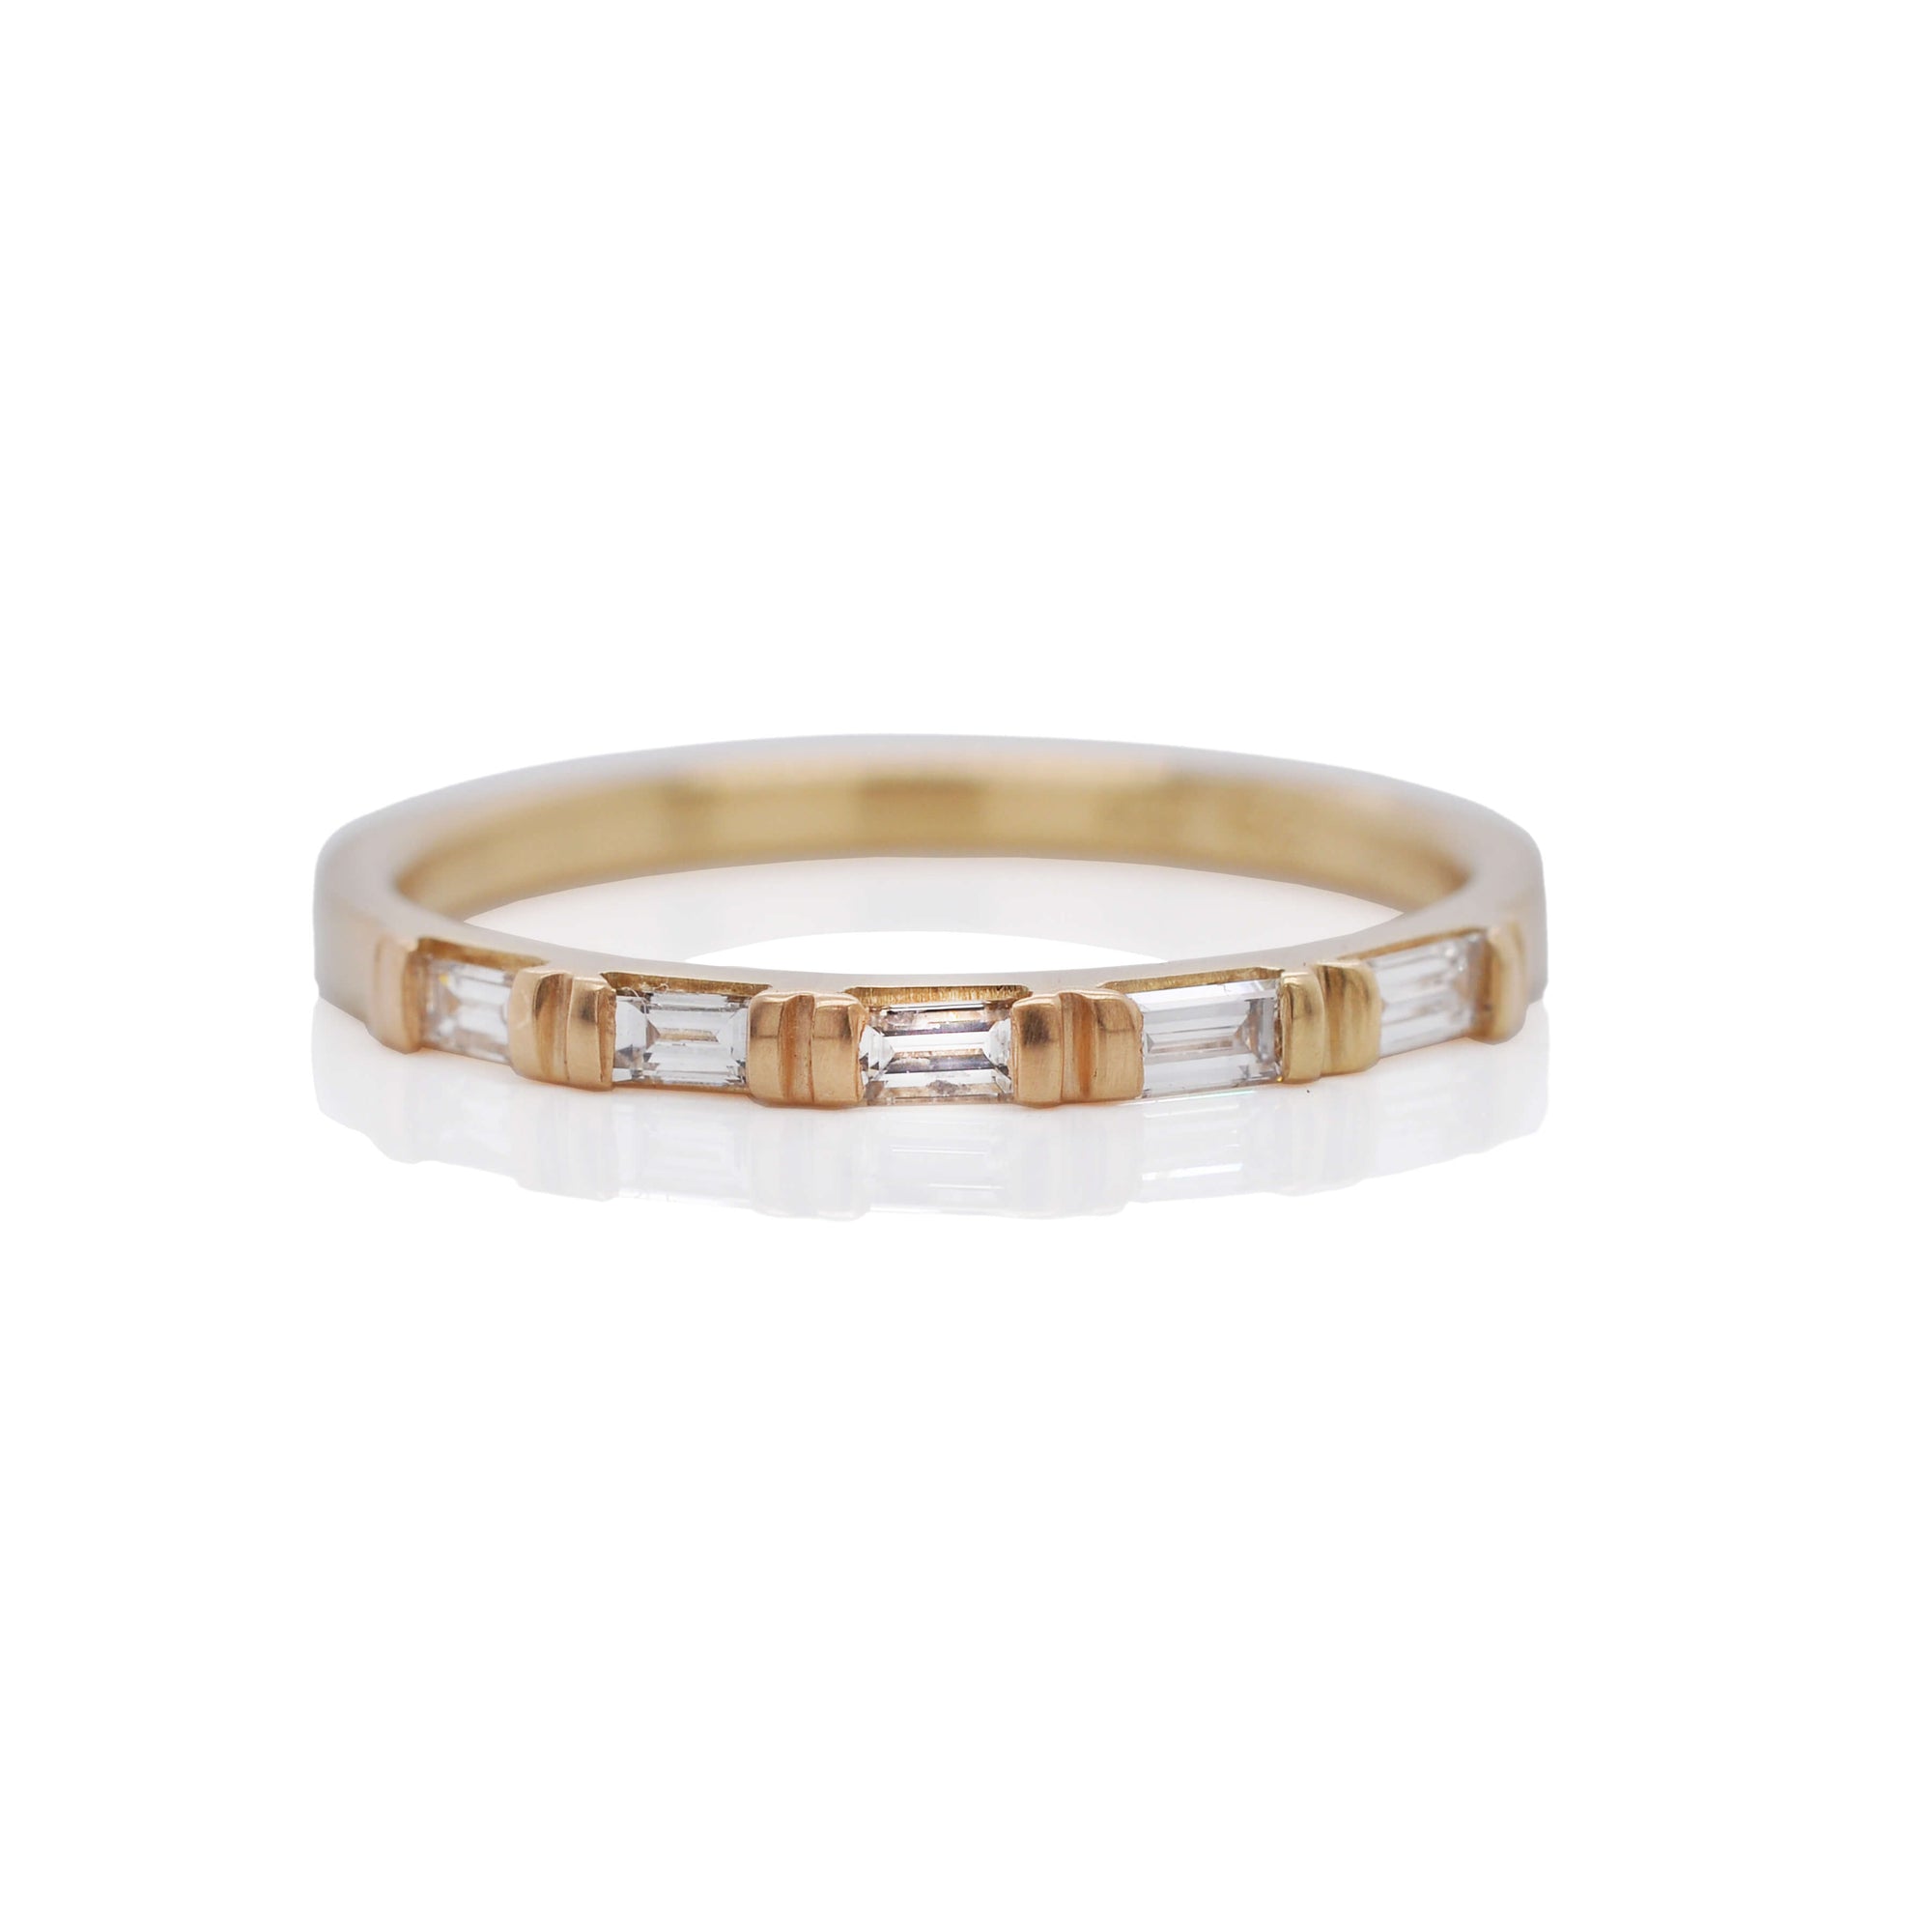 Baguette Diamond Ring in Yellow Gold